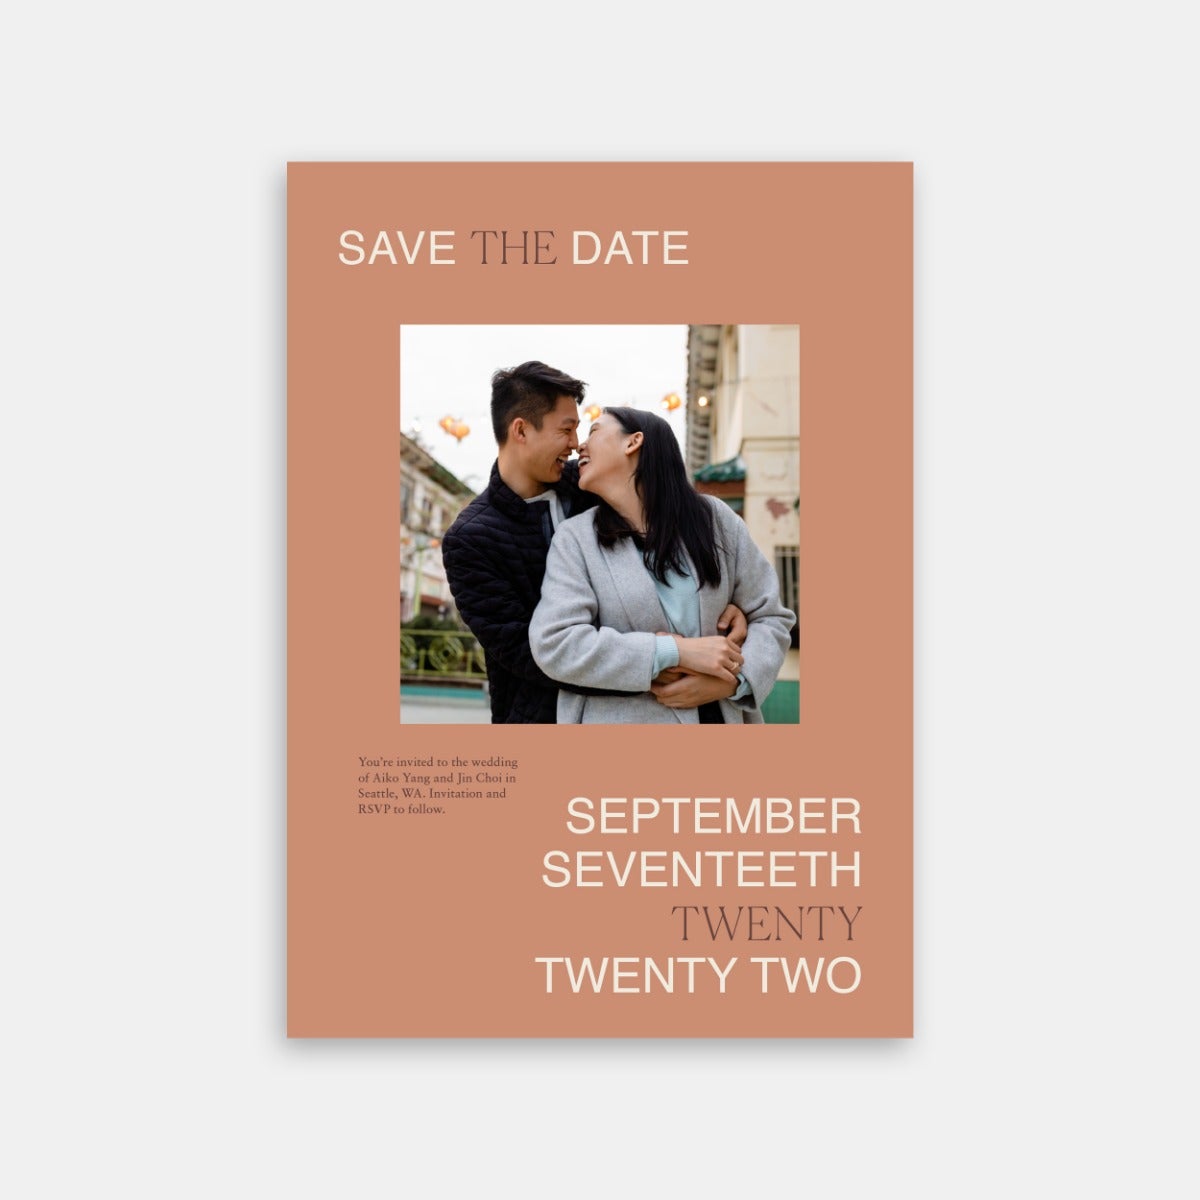 Details First Save the Date